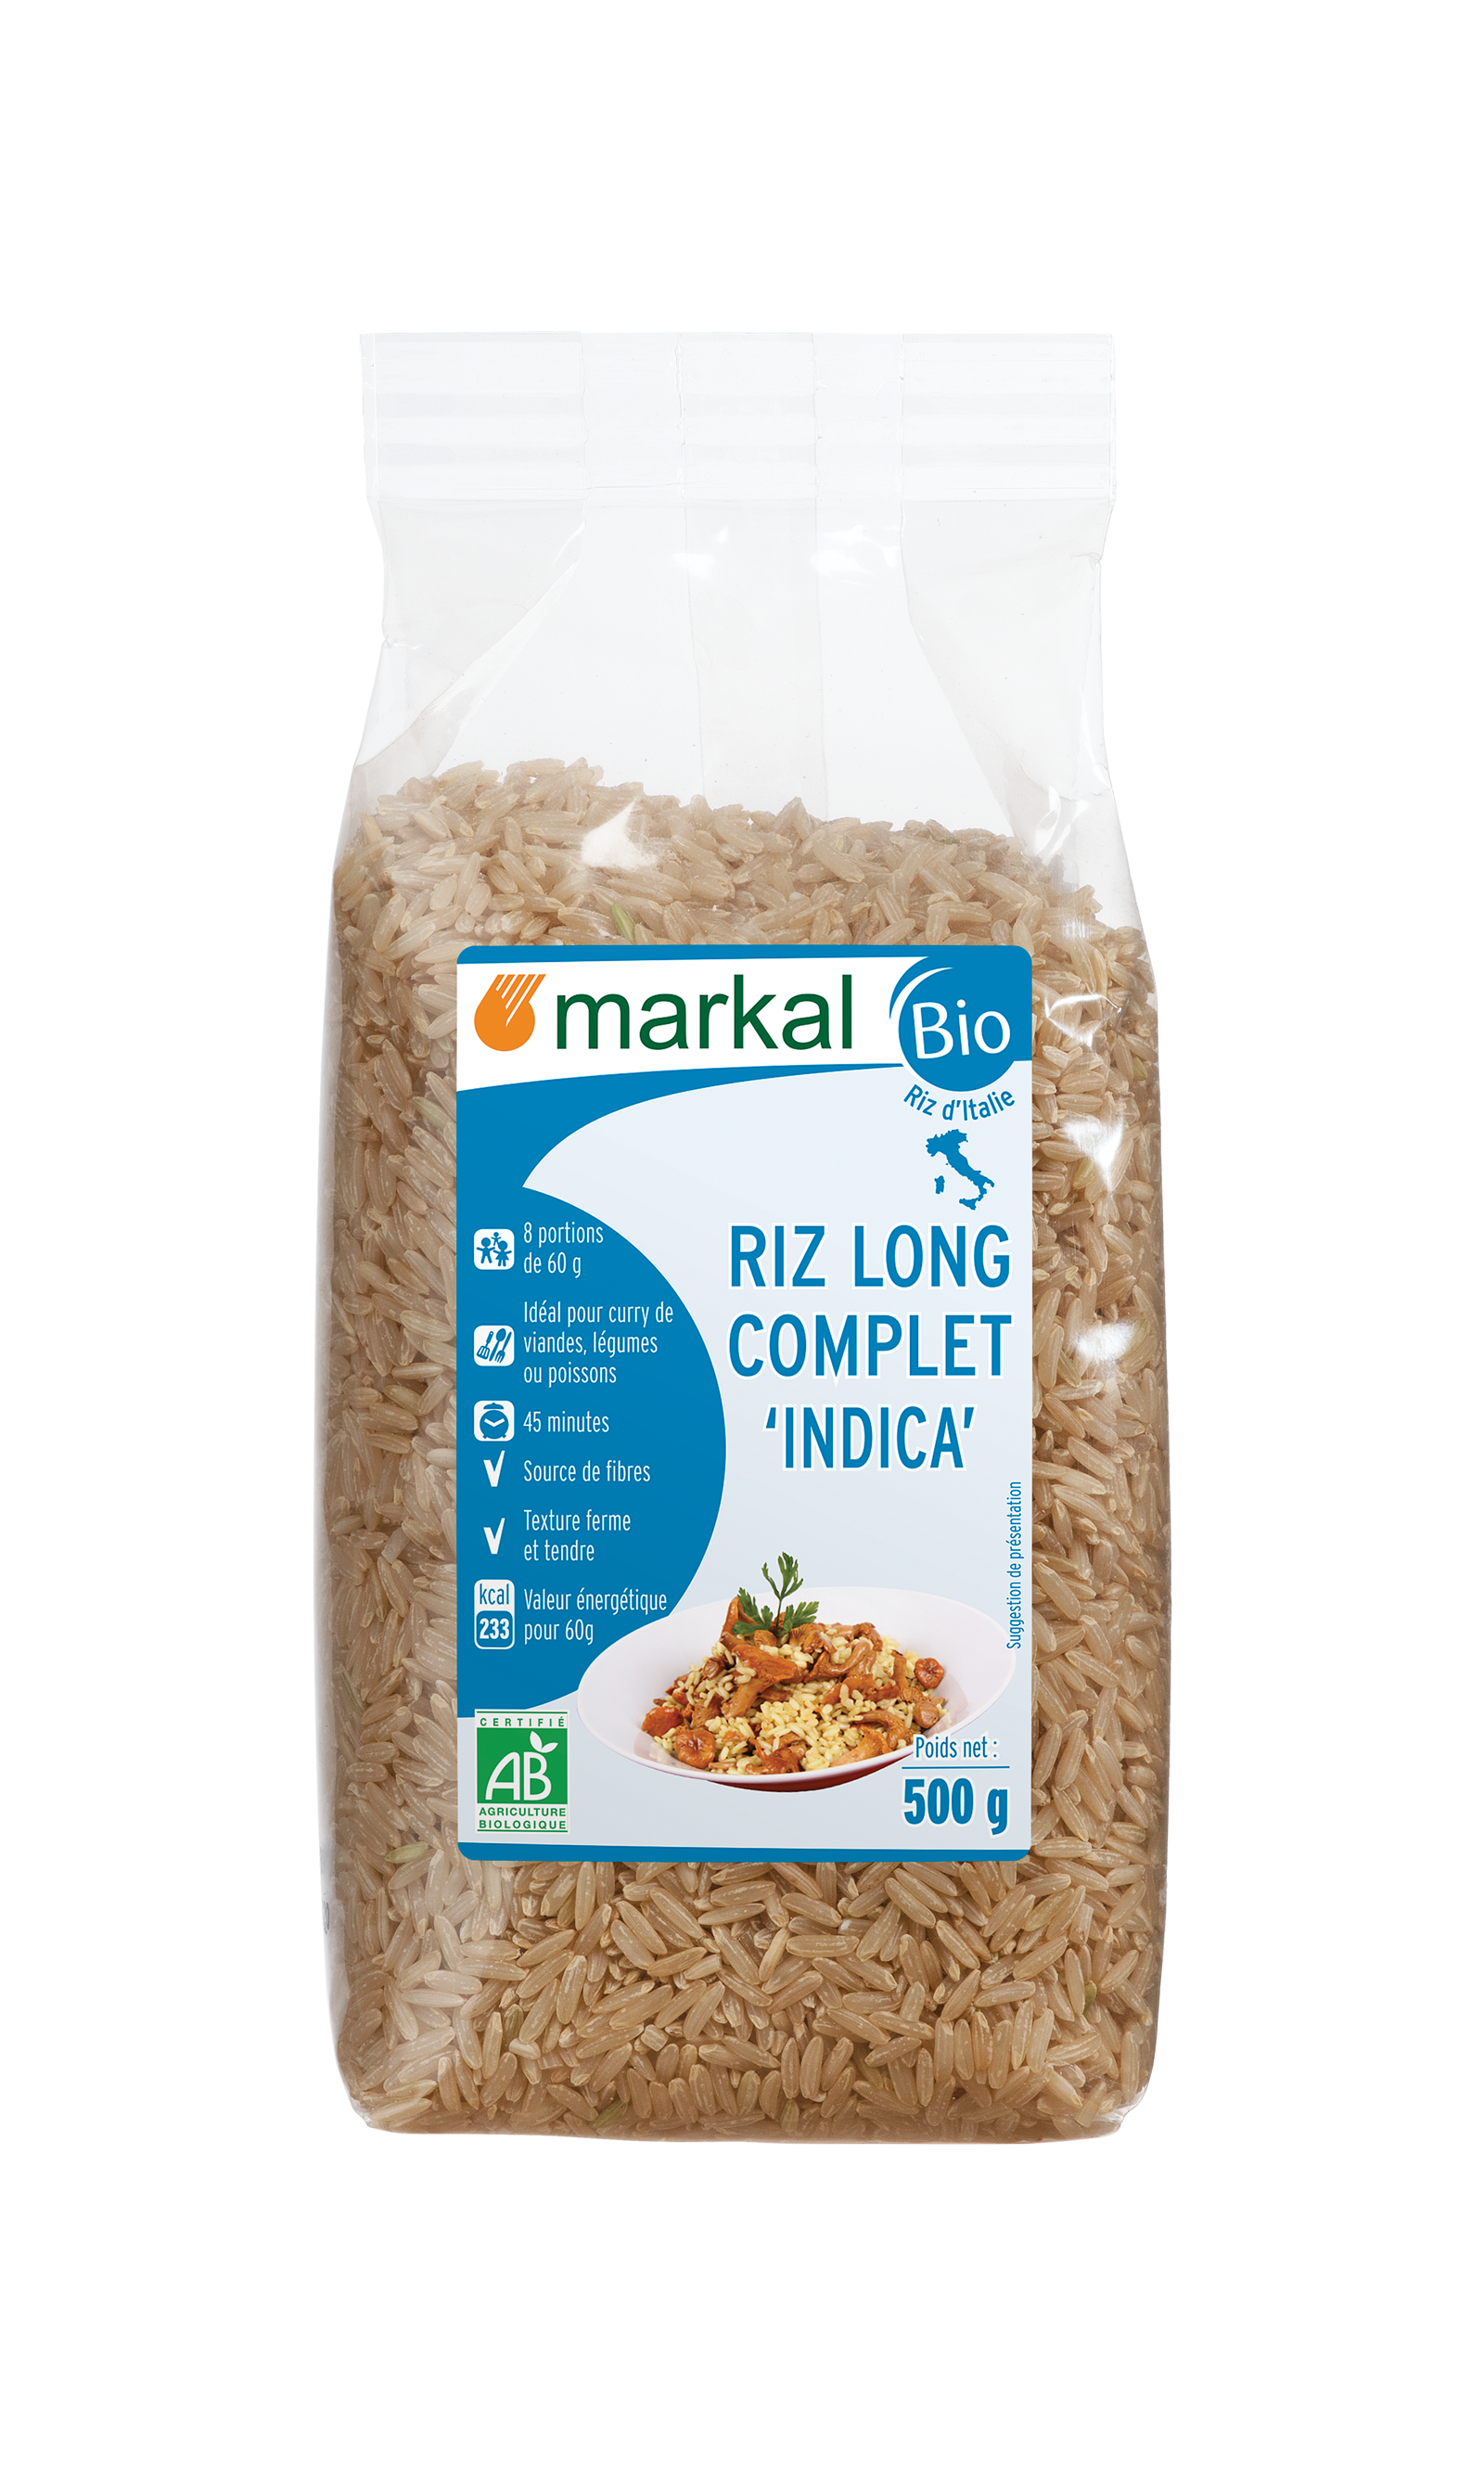 Riz long complet indica